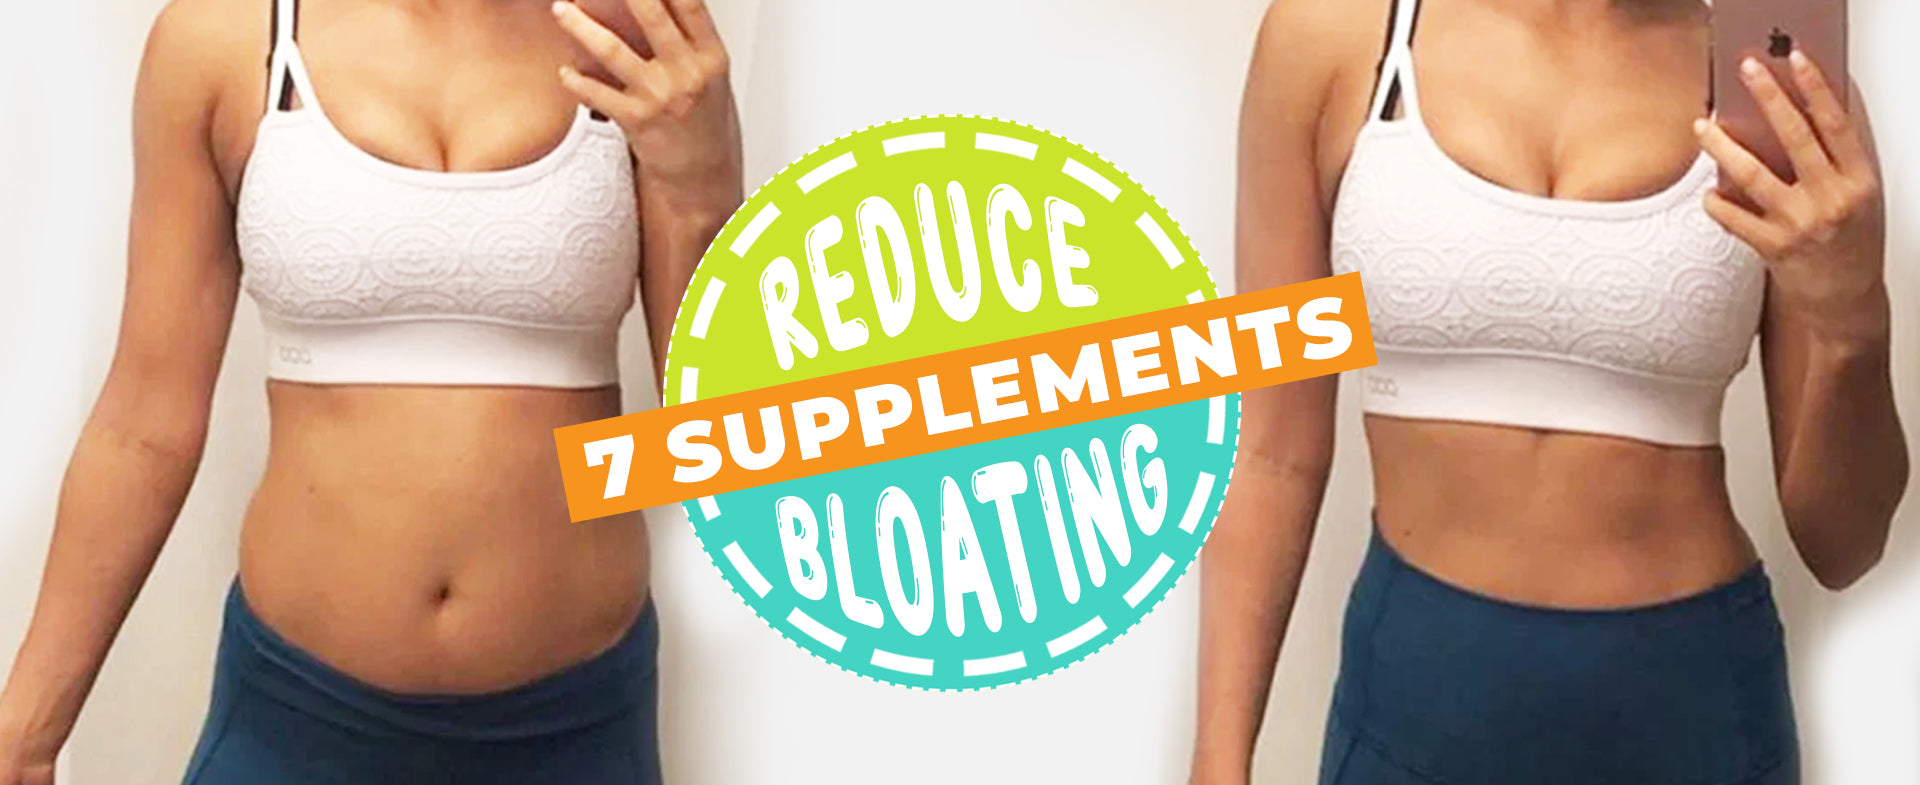 How to reduce bloating – SUP Supplements